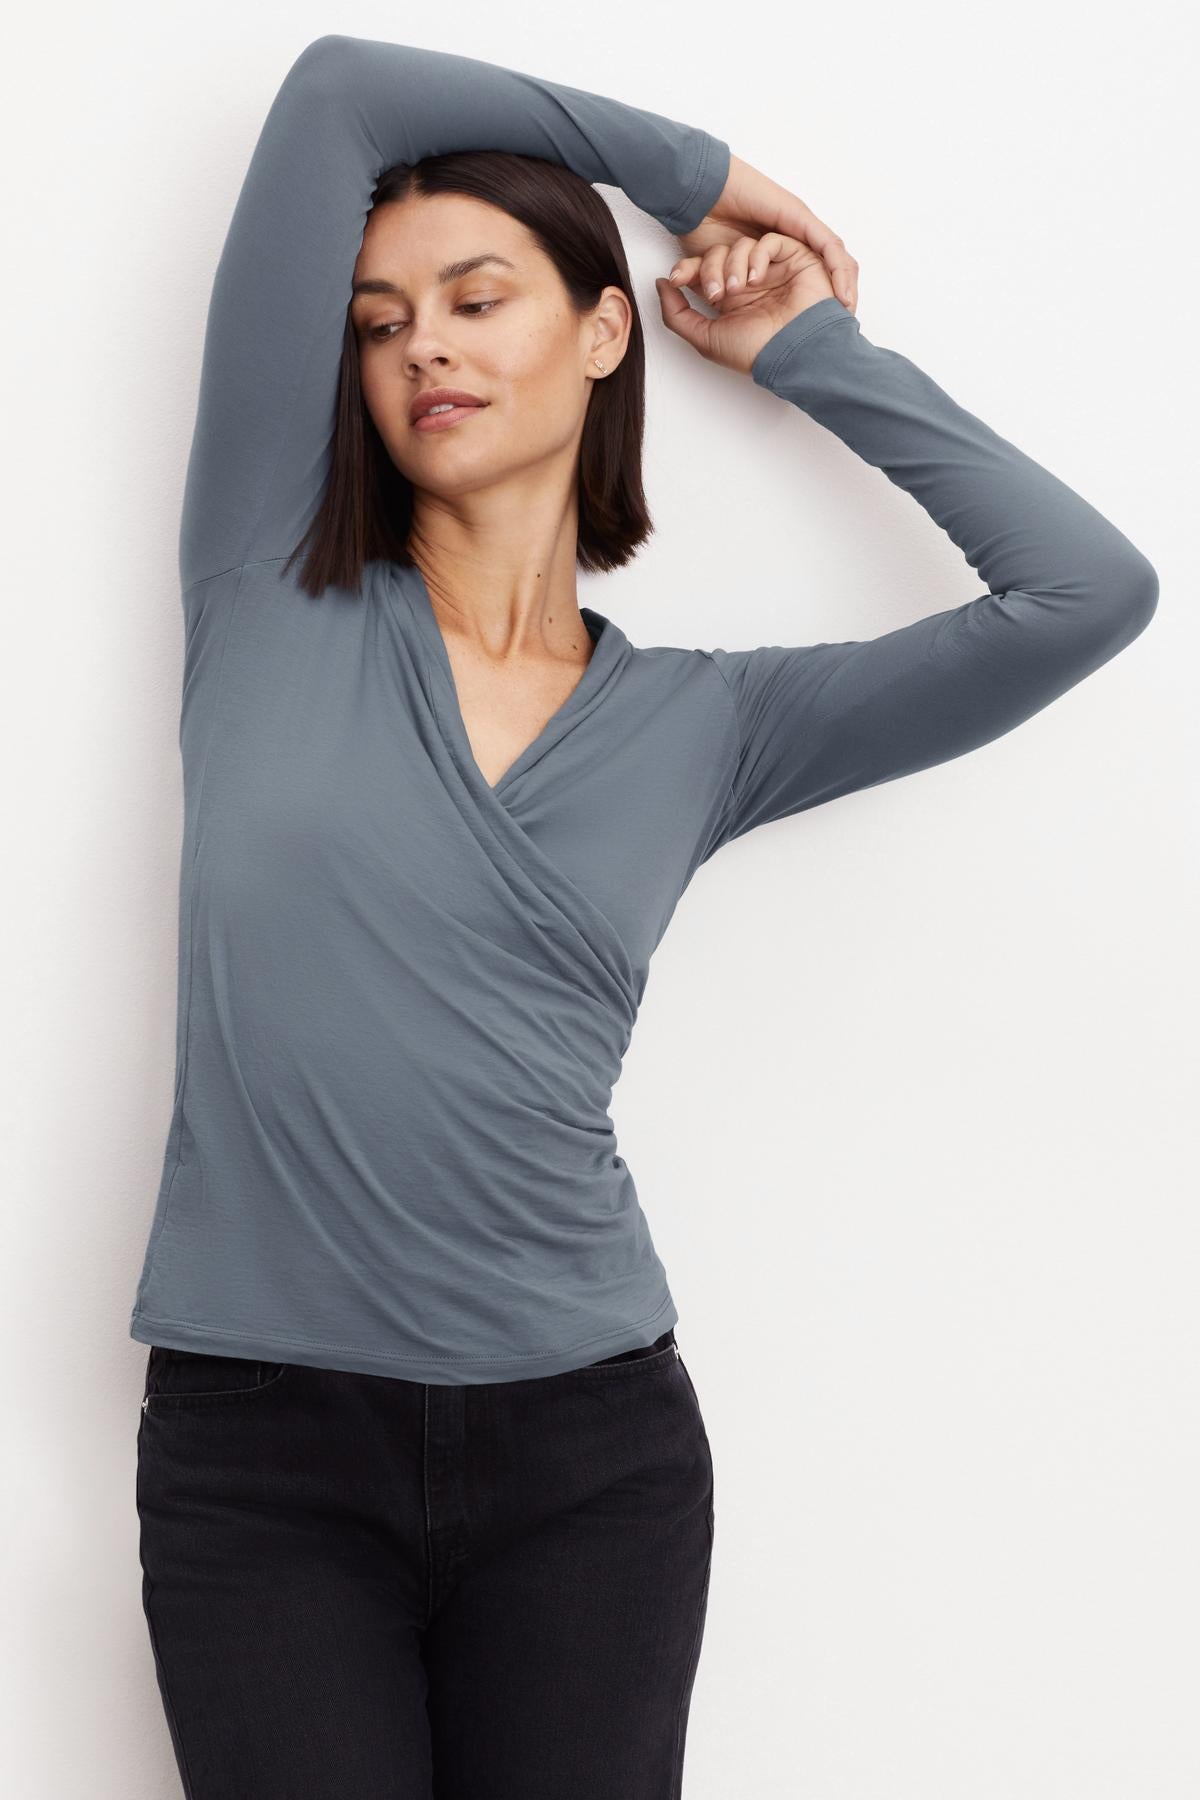 A woman wearing a Velvet by Graham & Spencer MERI WRAP FRONT FITTED TOP, a fitted, grey long-sleeved top with a cross over v-neck.-36094410555585